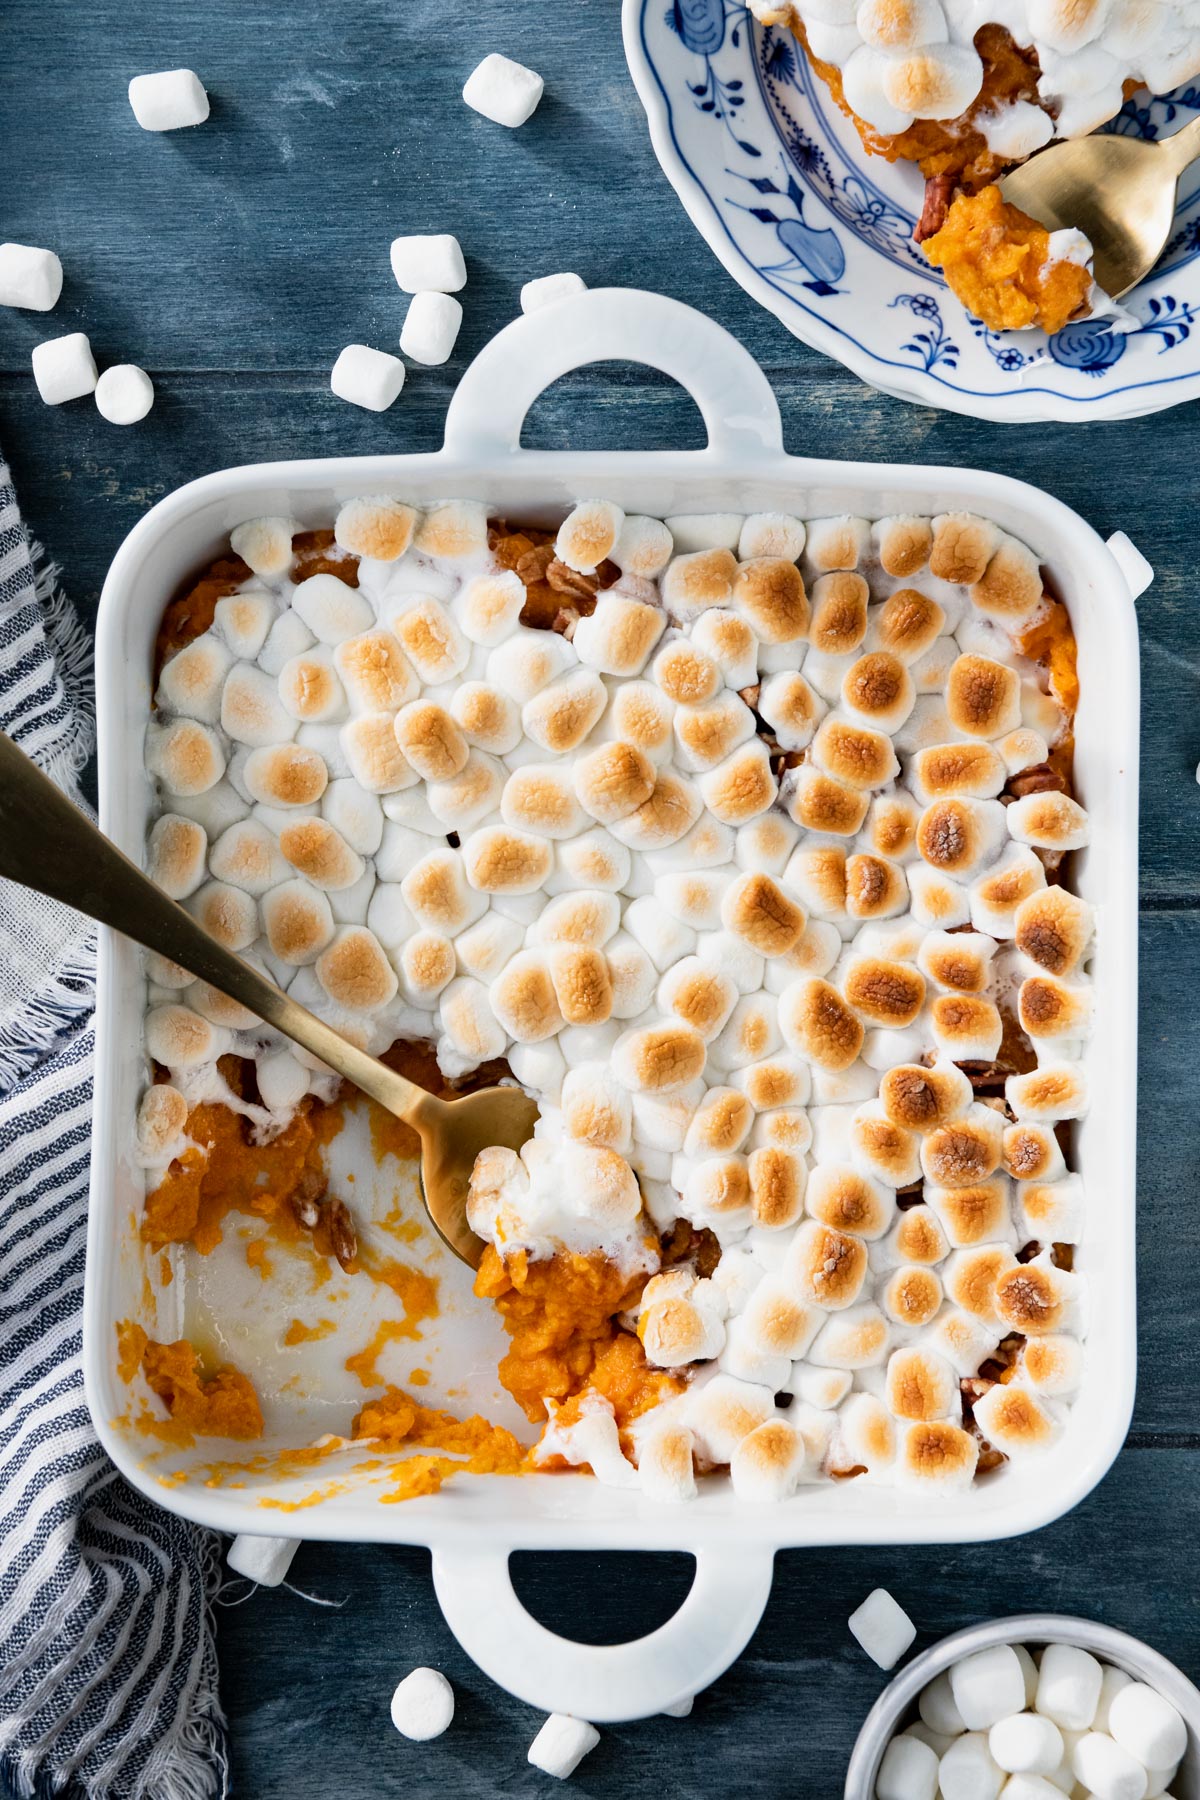 Sweet potato casserole with marshmallows in a white dish on a wooden blue table